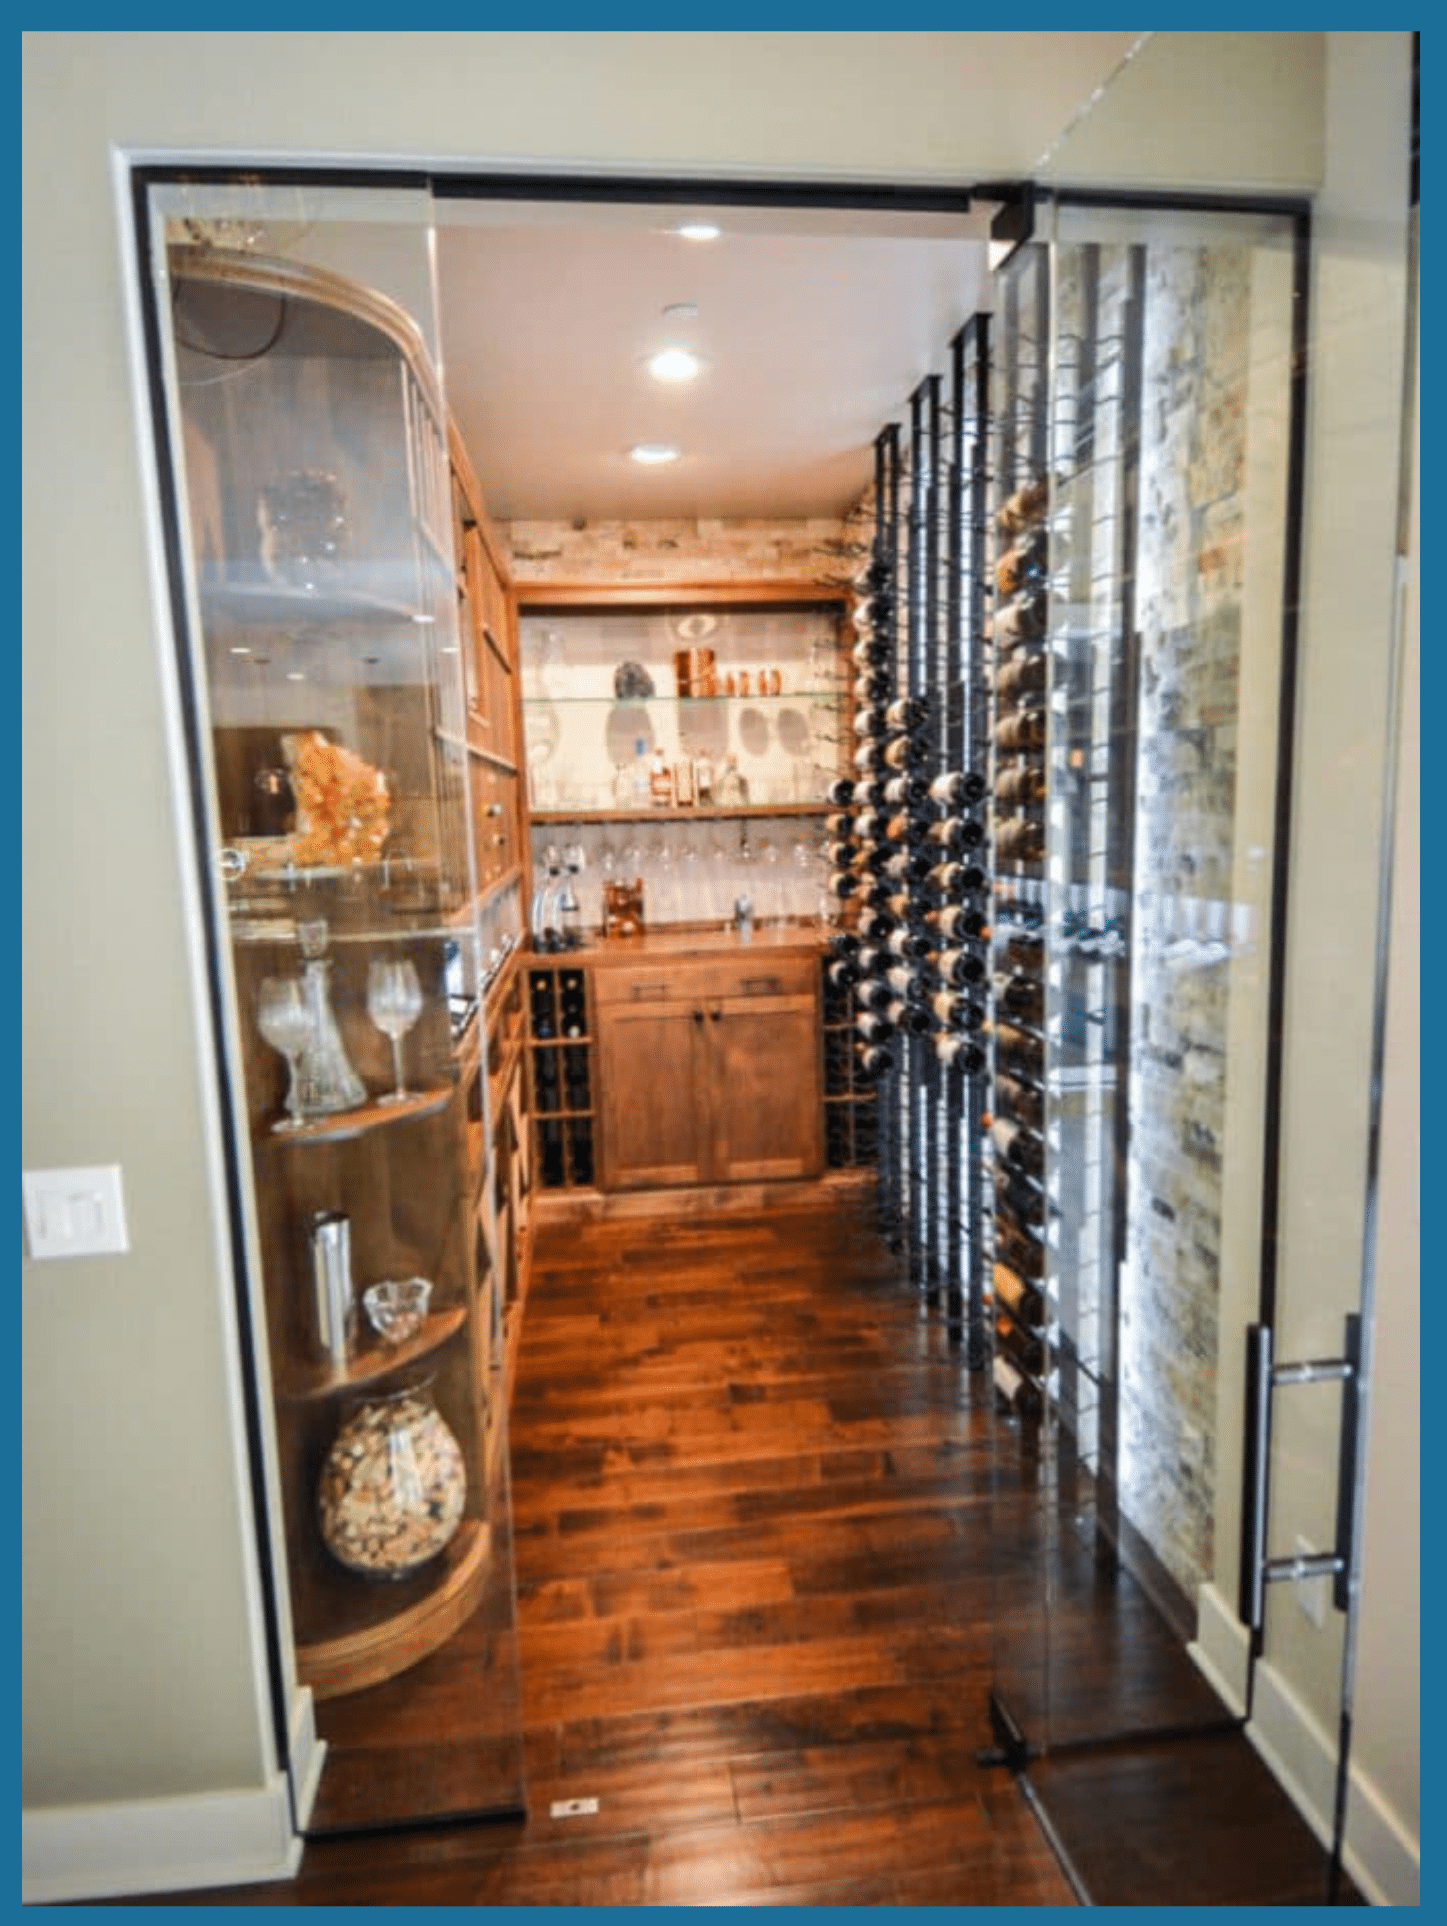 CellarPro Wine Cooling Unit Installed in this Glass Wine Room in San Diego 